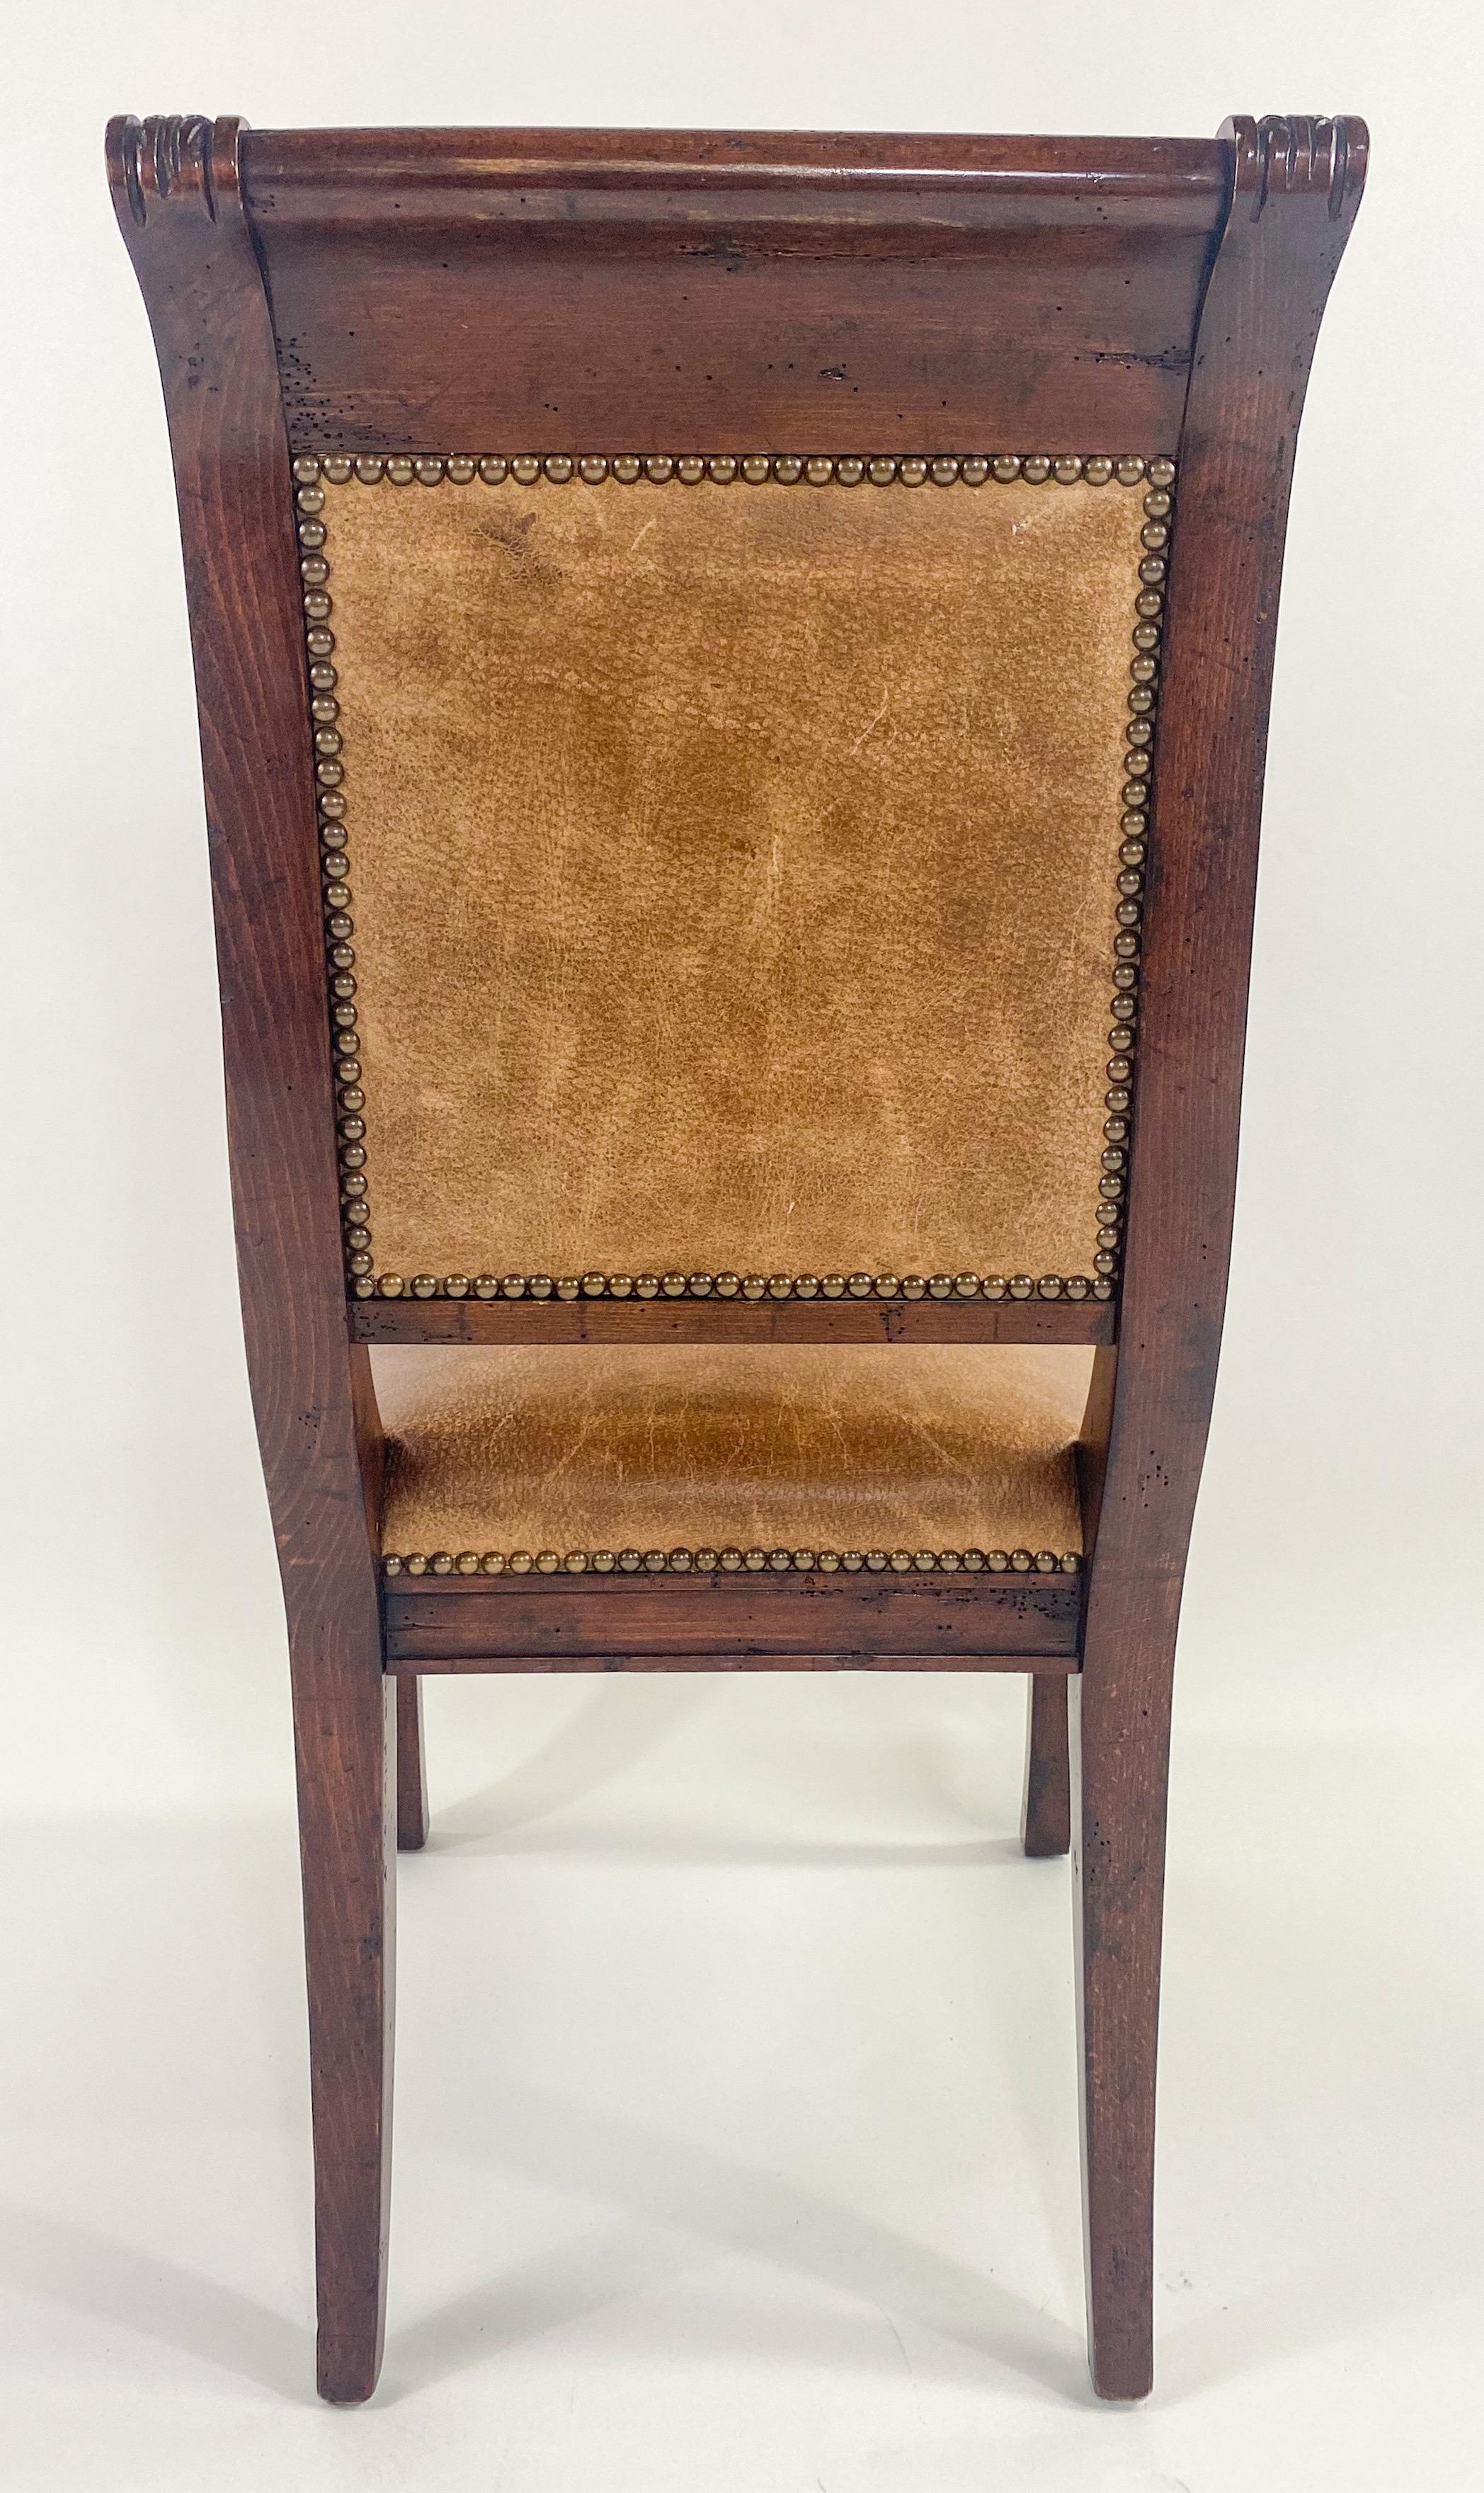 French Empire Style Mahogany & Leather Saber Legs Dining Chair, A Set of 8 For Sale 11